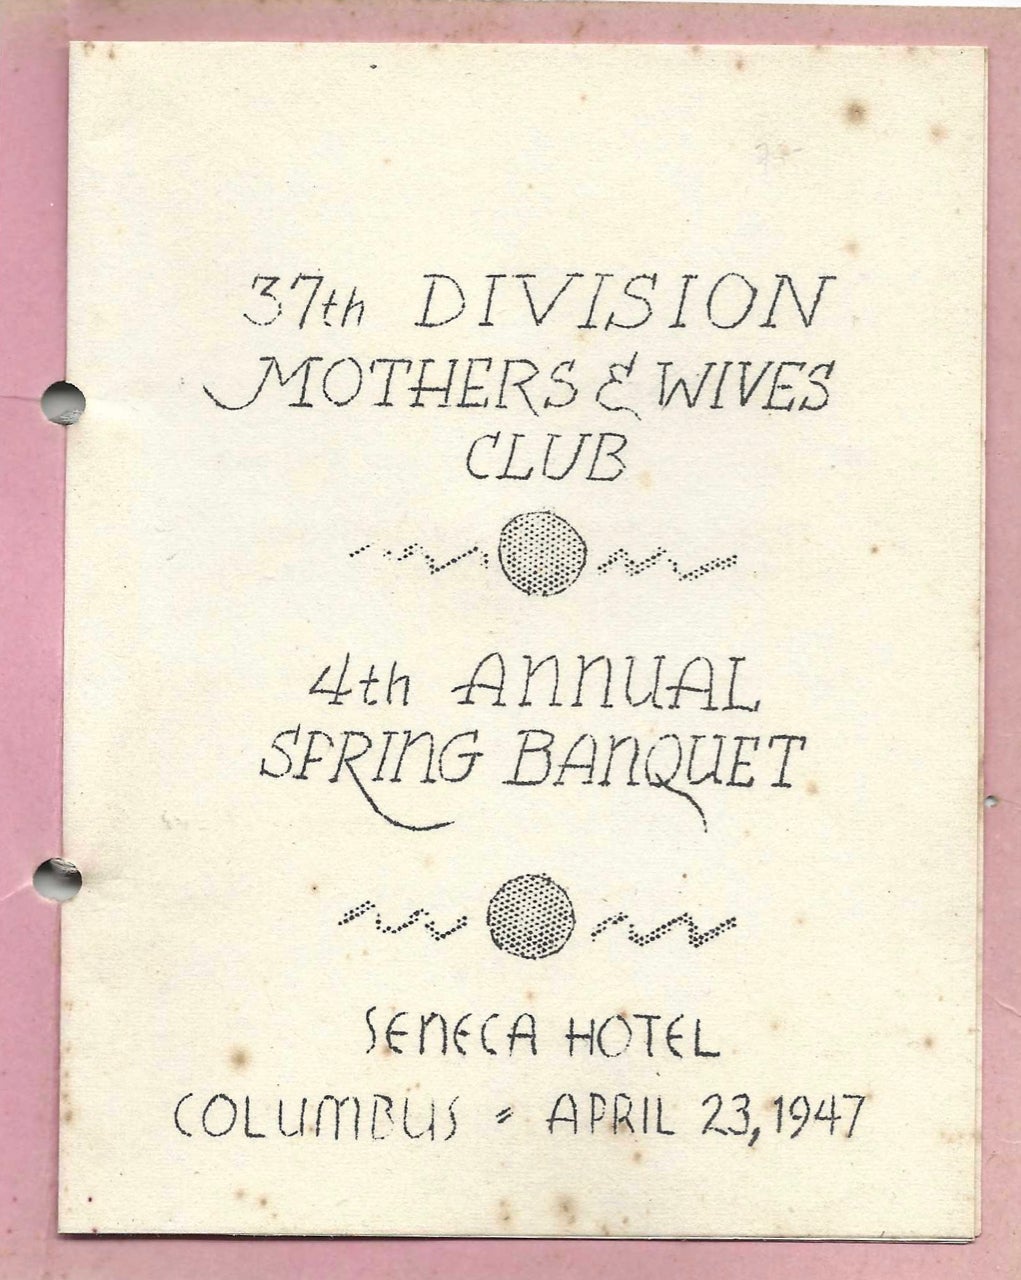 Item #9170 37th Division Mothers and Wives Club 4th Annual Spring Banquet: Seneca Hotel, Columbus April 23, 1947. Menu – 37th Division Mothers, Wives Club, Ohio Columbus.